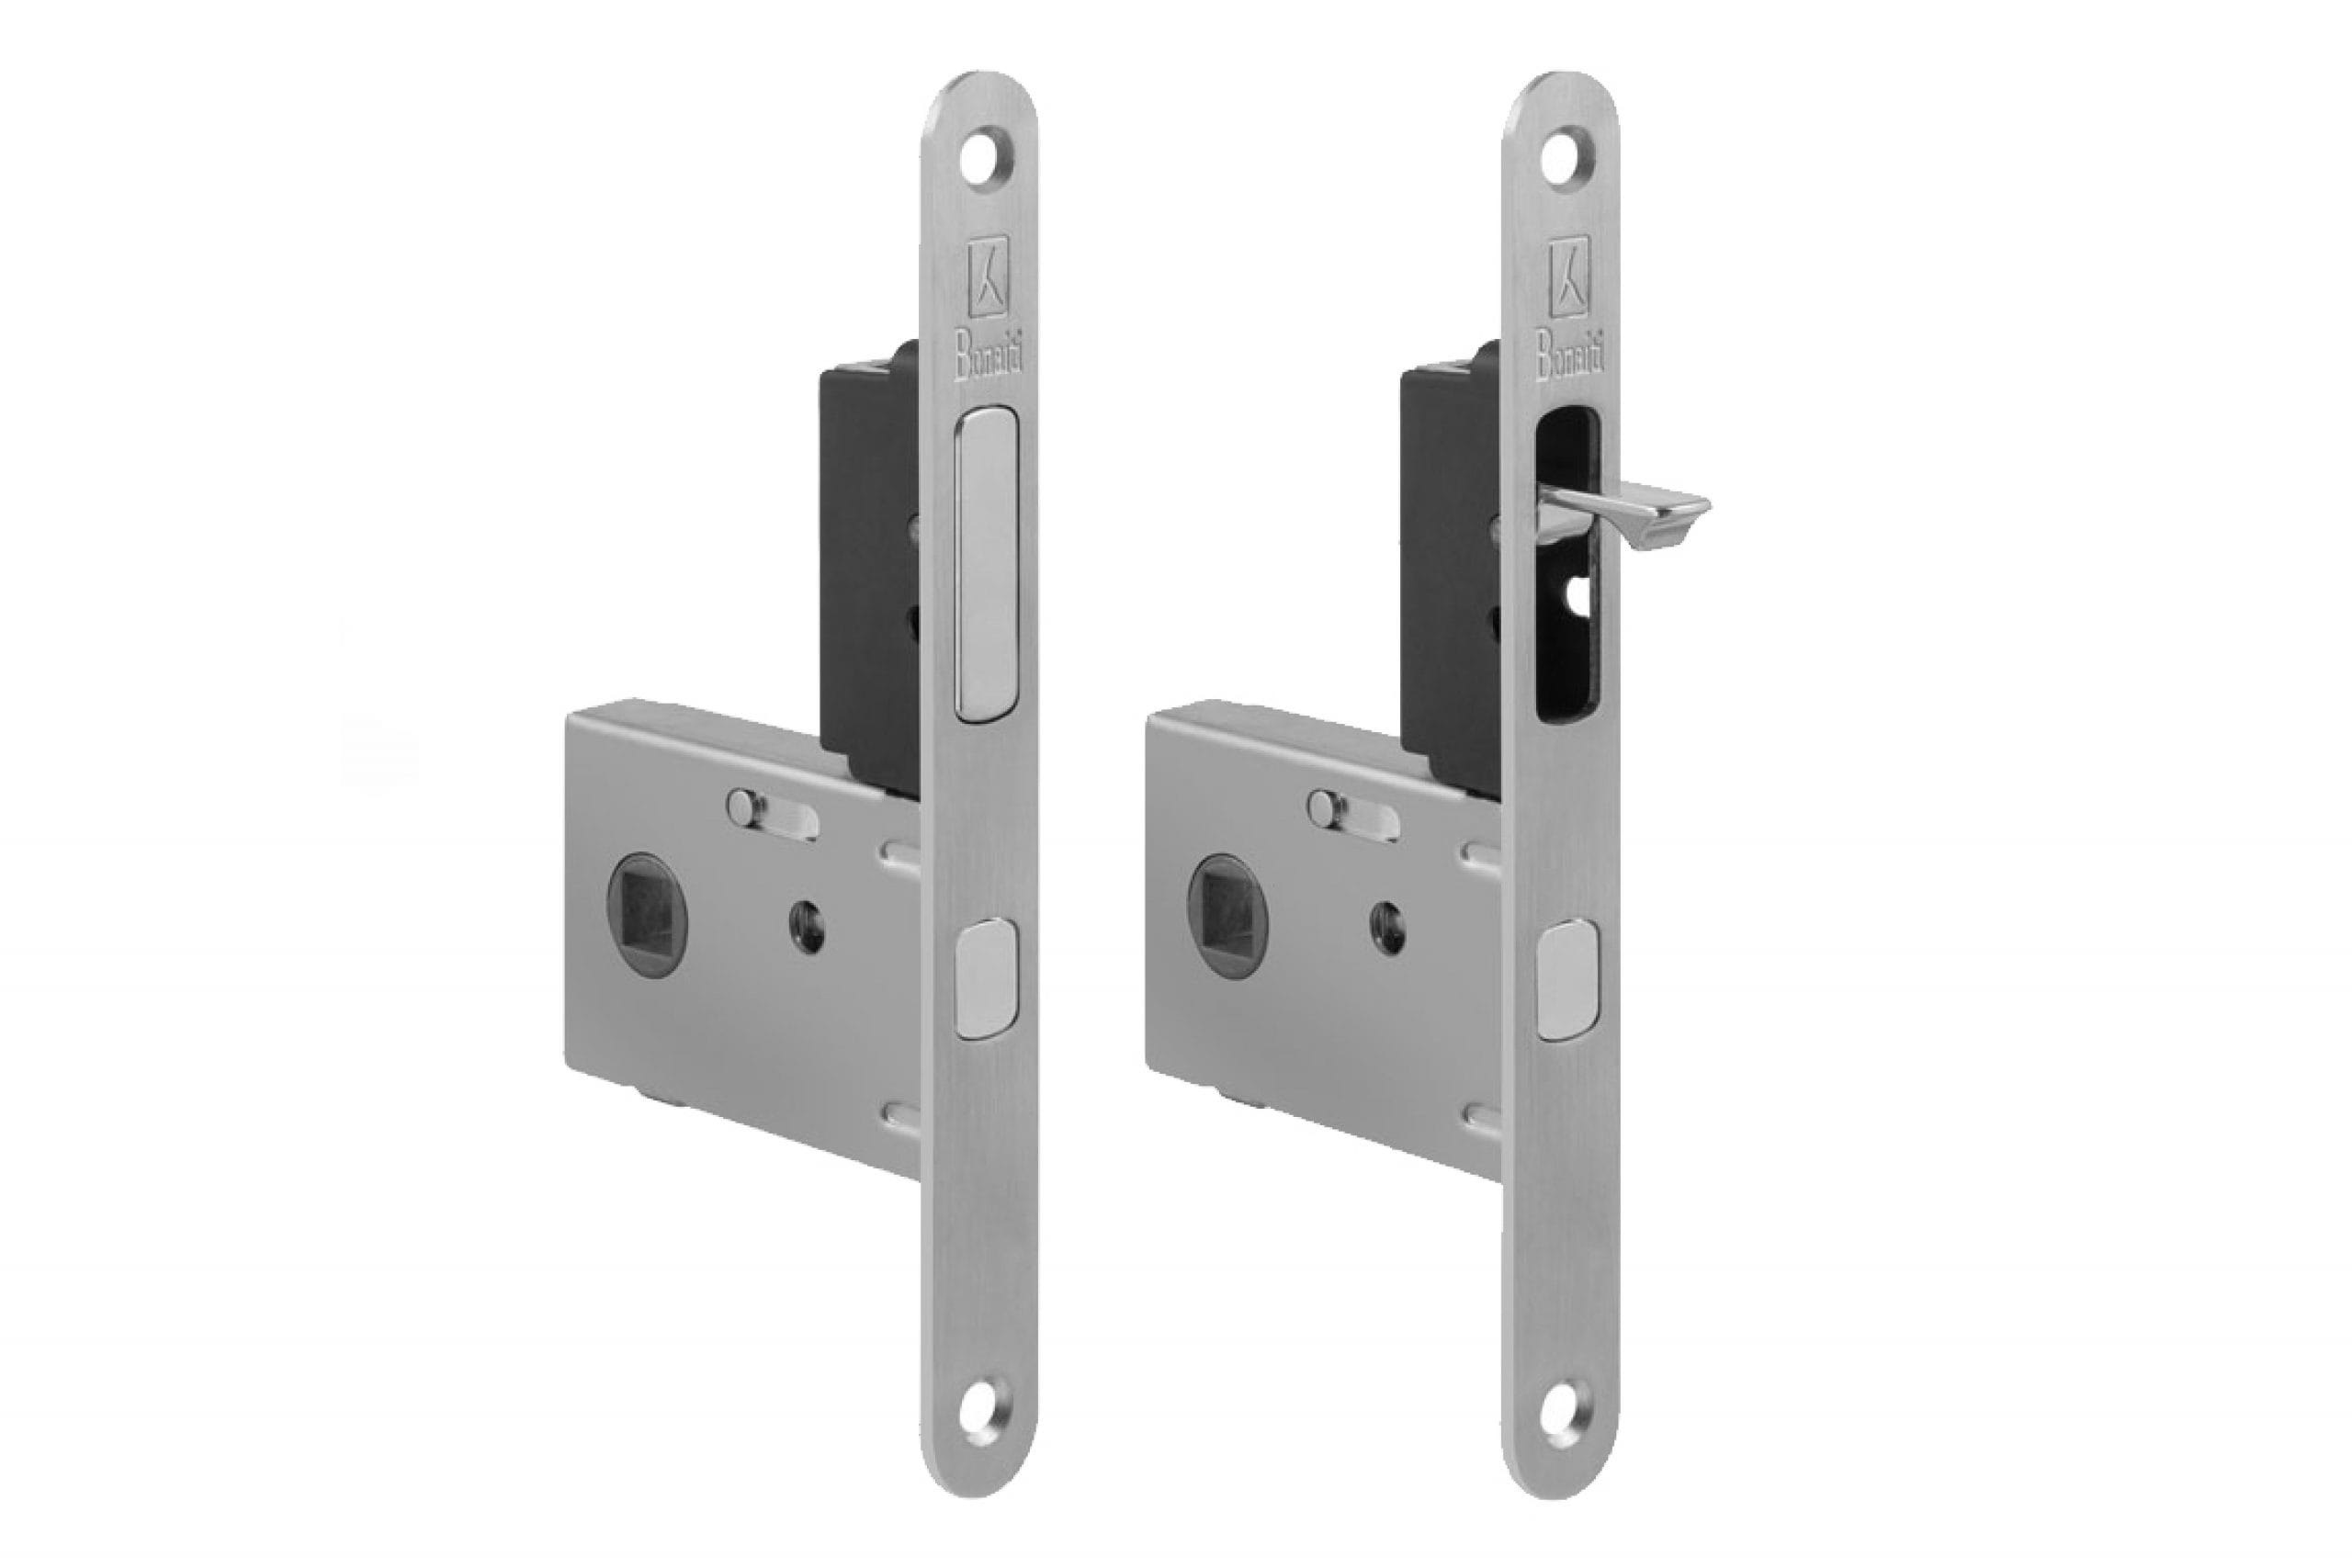 Sliding Door Lock With Integrated Finger Pull by Bellevue Architectural